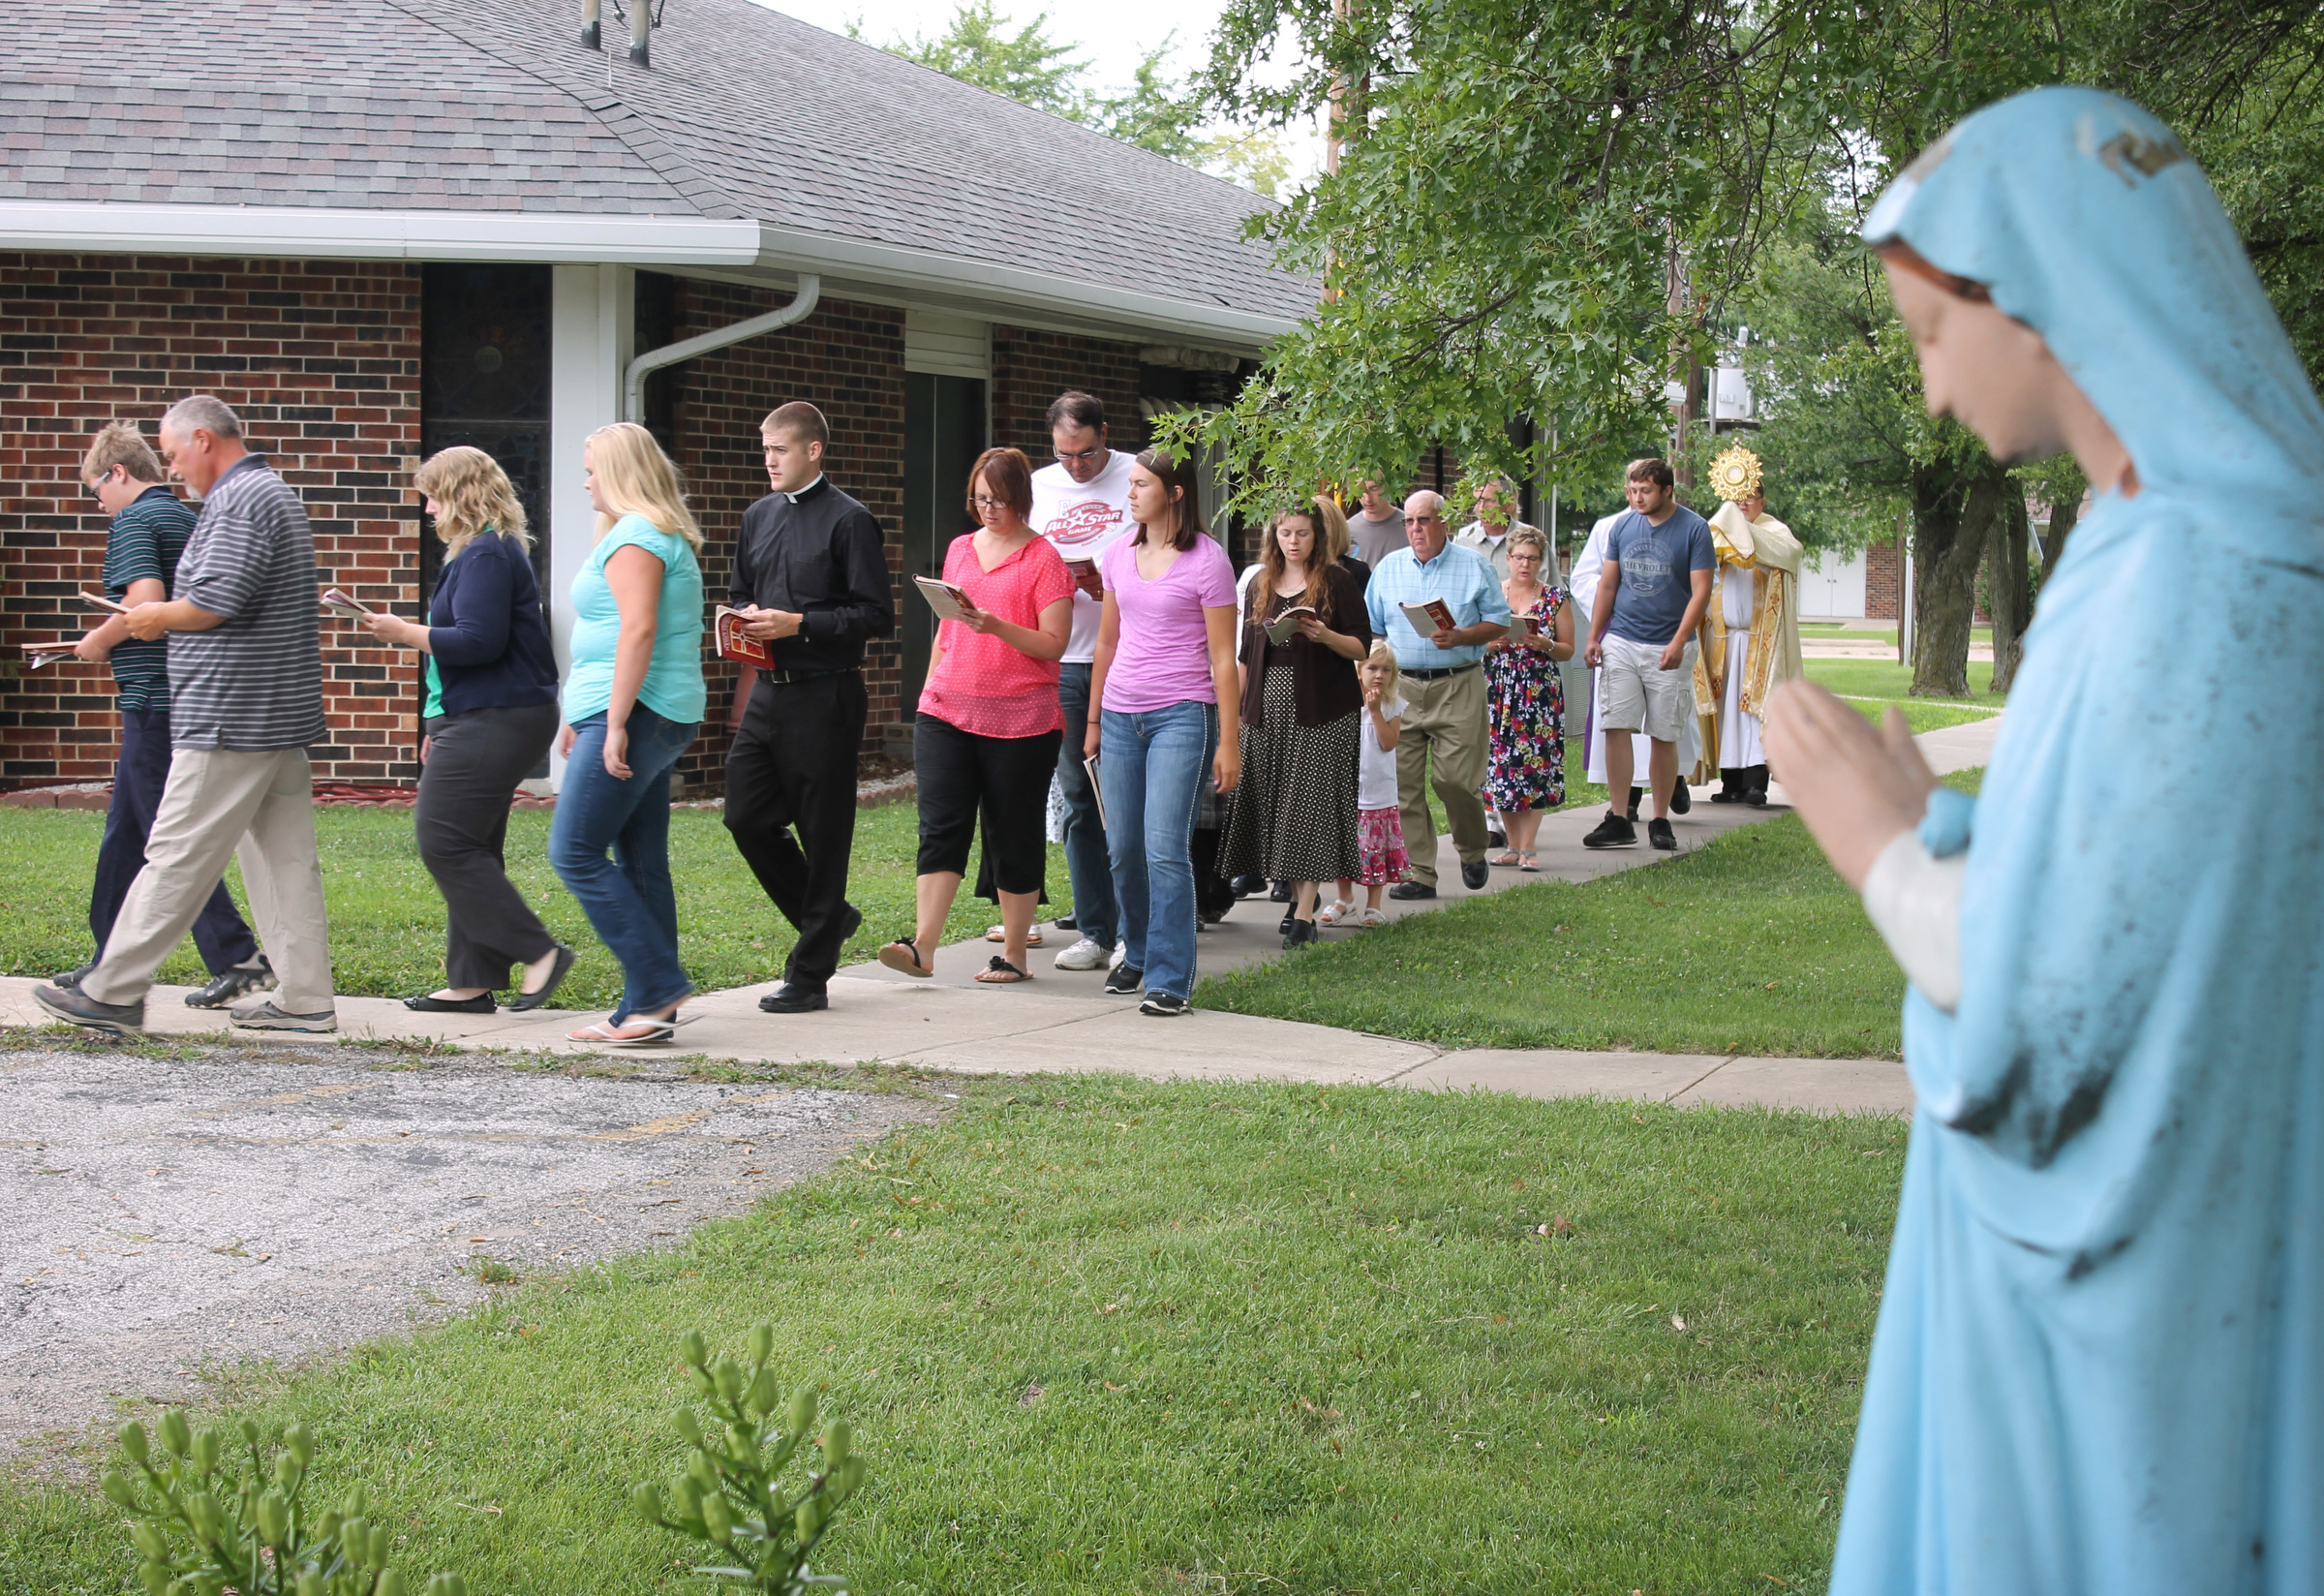 Parishioners walk to Mass at St. Clement Church in St. Clement, Mo., July 30. The church had been vandalized and desecrated the previous Sunday. (CNS photo/Jay Nies, Diocese of Jefferson City)